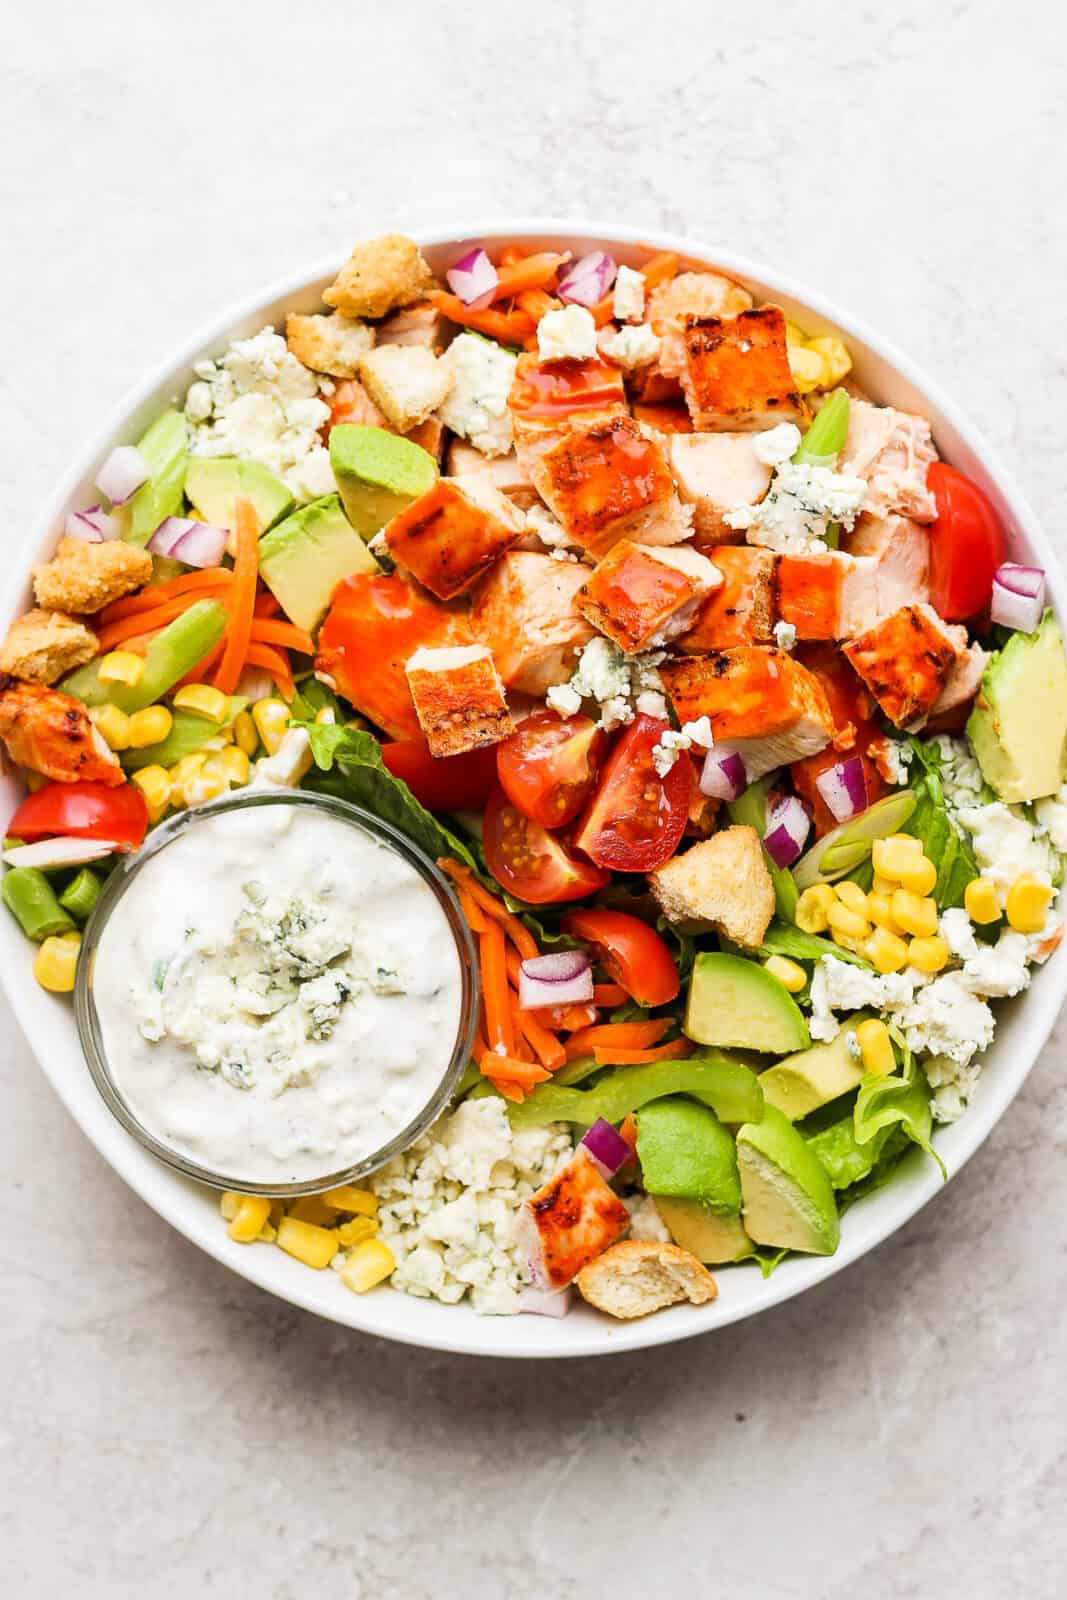 An ultimate buffalo chicken salad with a small dish of blue cheese dressing.